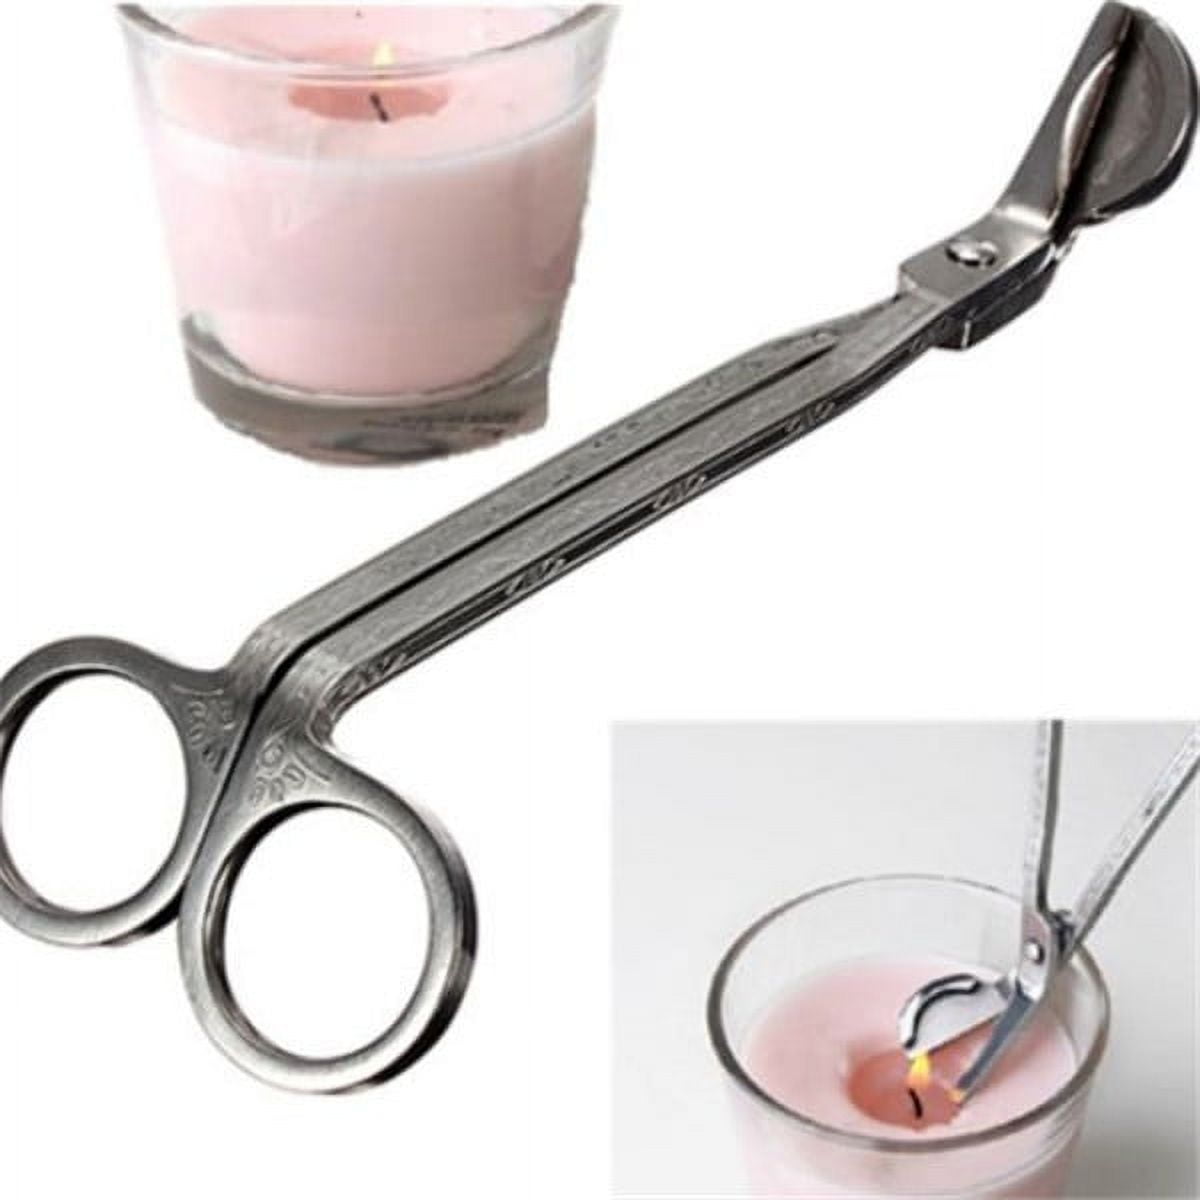 Evermarket Candle Wick Trimmer, Polished Stainless Steel Wick Clipper Cutter - Reaches Deep Into Candles to Cut Spent Wicks, Allow Cleaner Burn and P